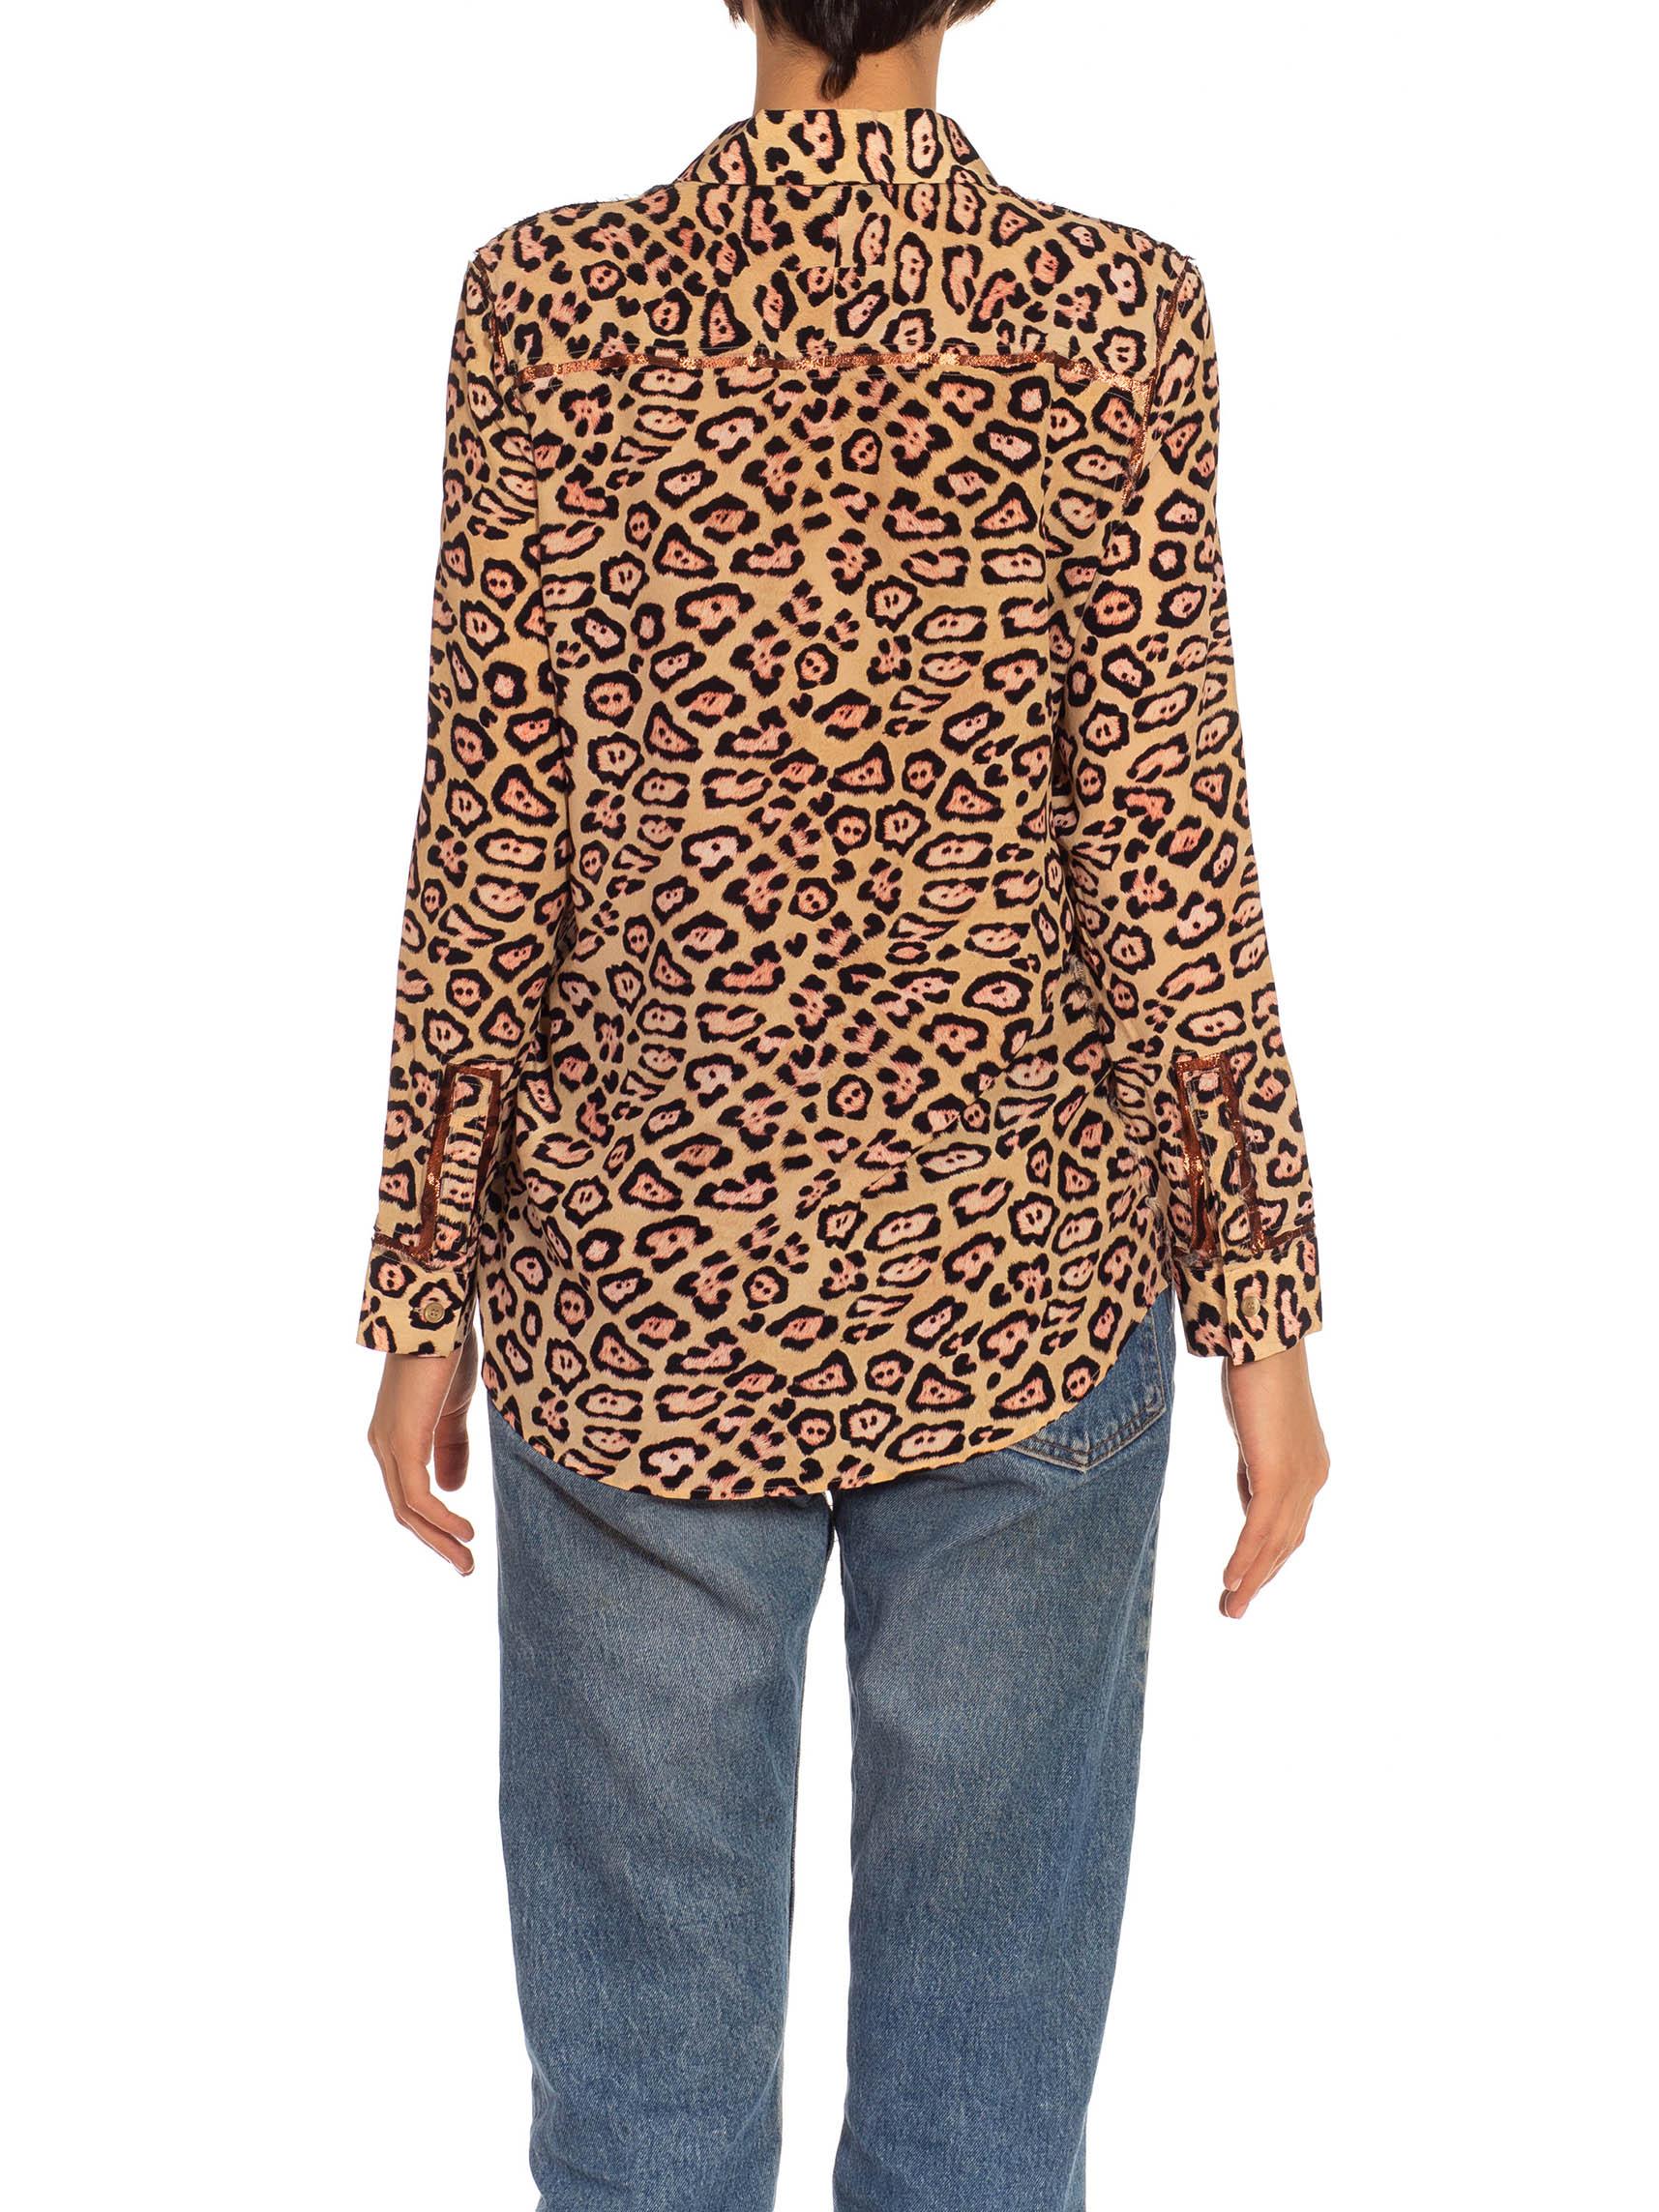 2010S GIVENCHY Leopard Print Tan & Brown Silk With Metallic Trimmings Shirt For Sale 6